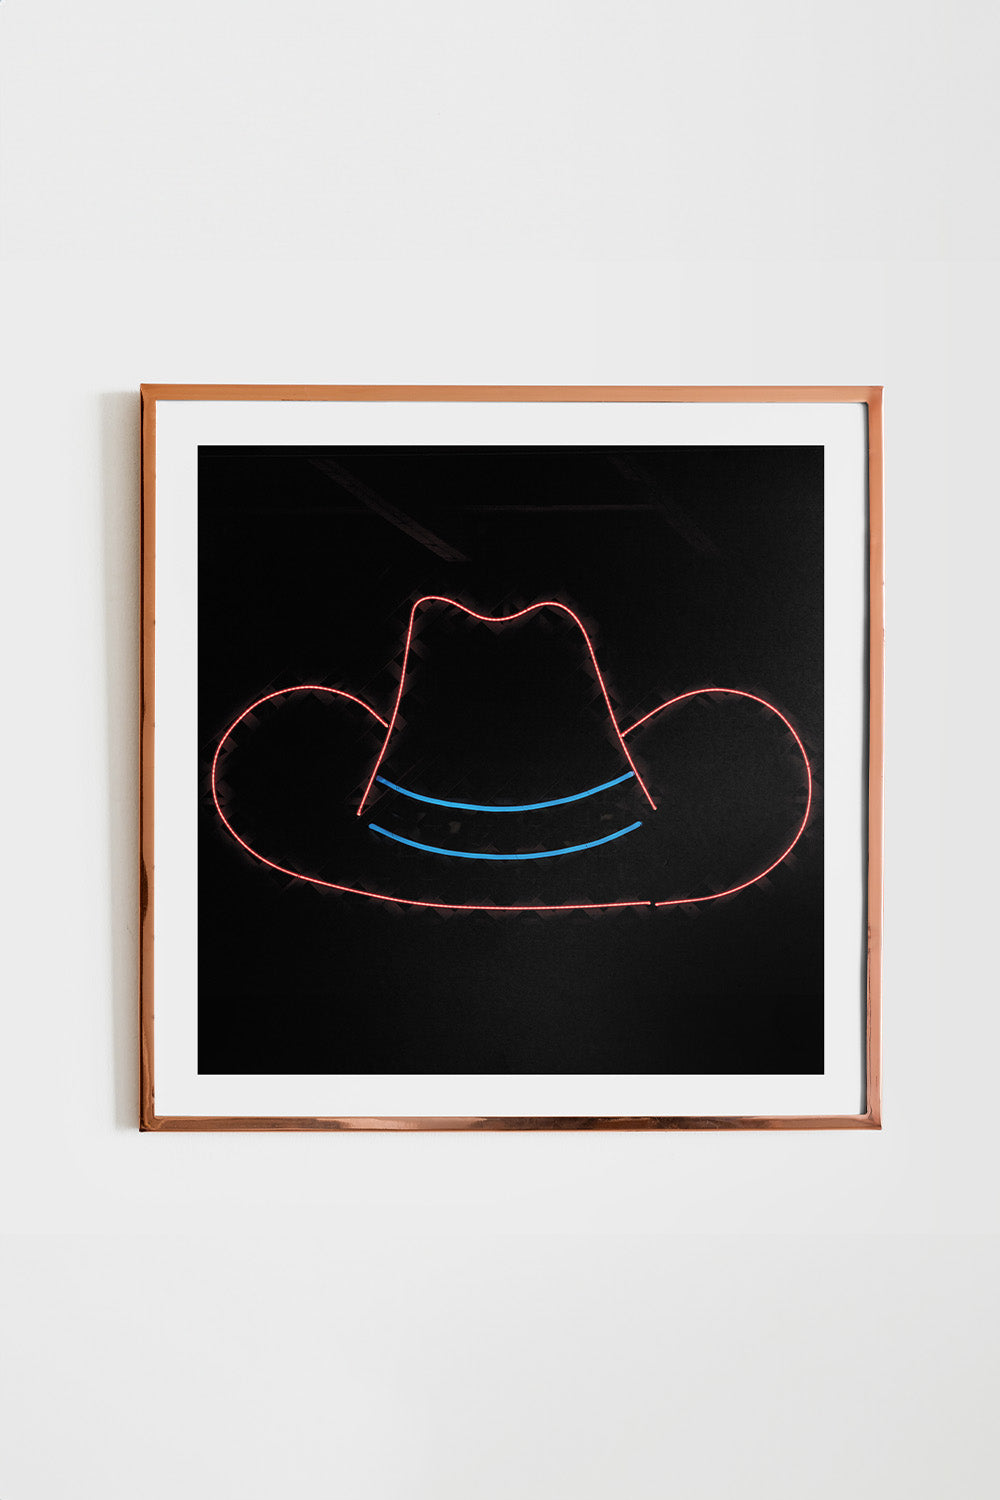 Square art print of 'Neon Cowboy Hat', featuring a bold black background with a simple thin outline of a cowboy hat.